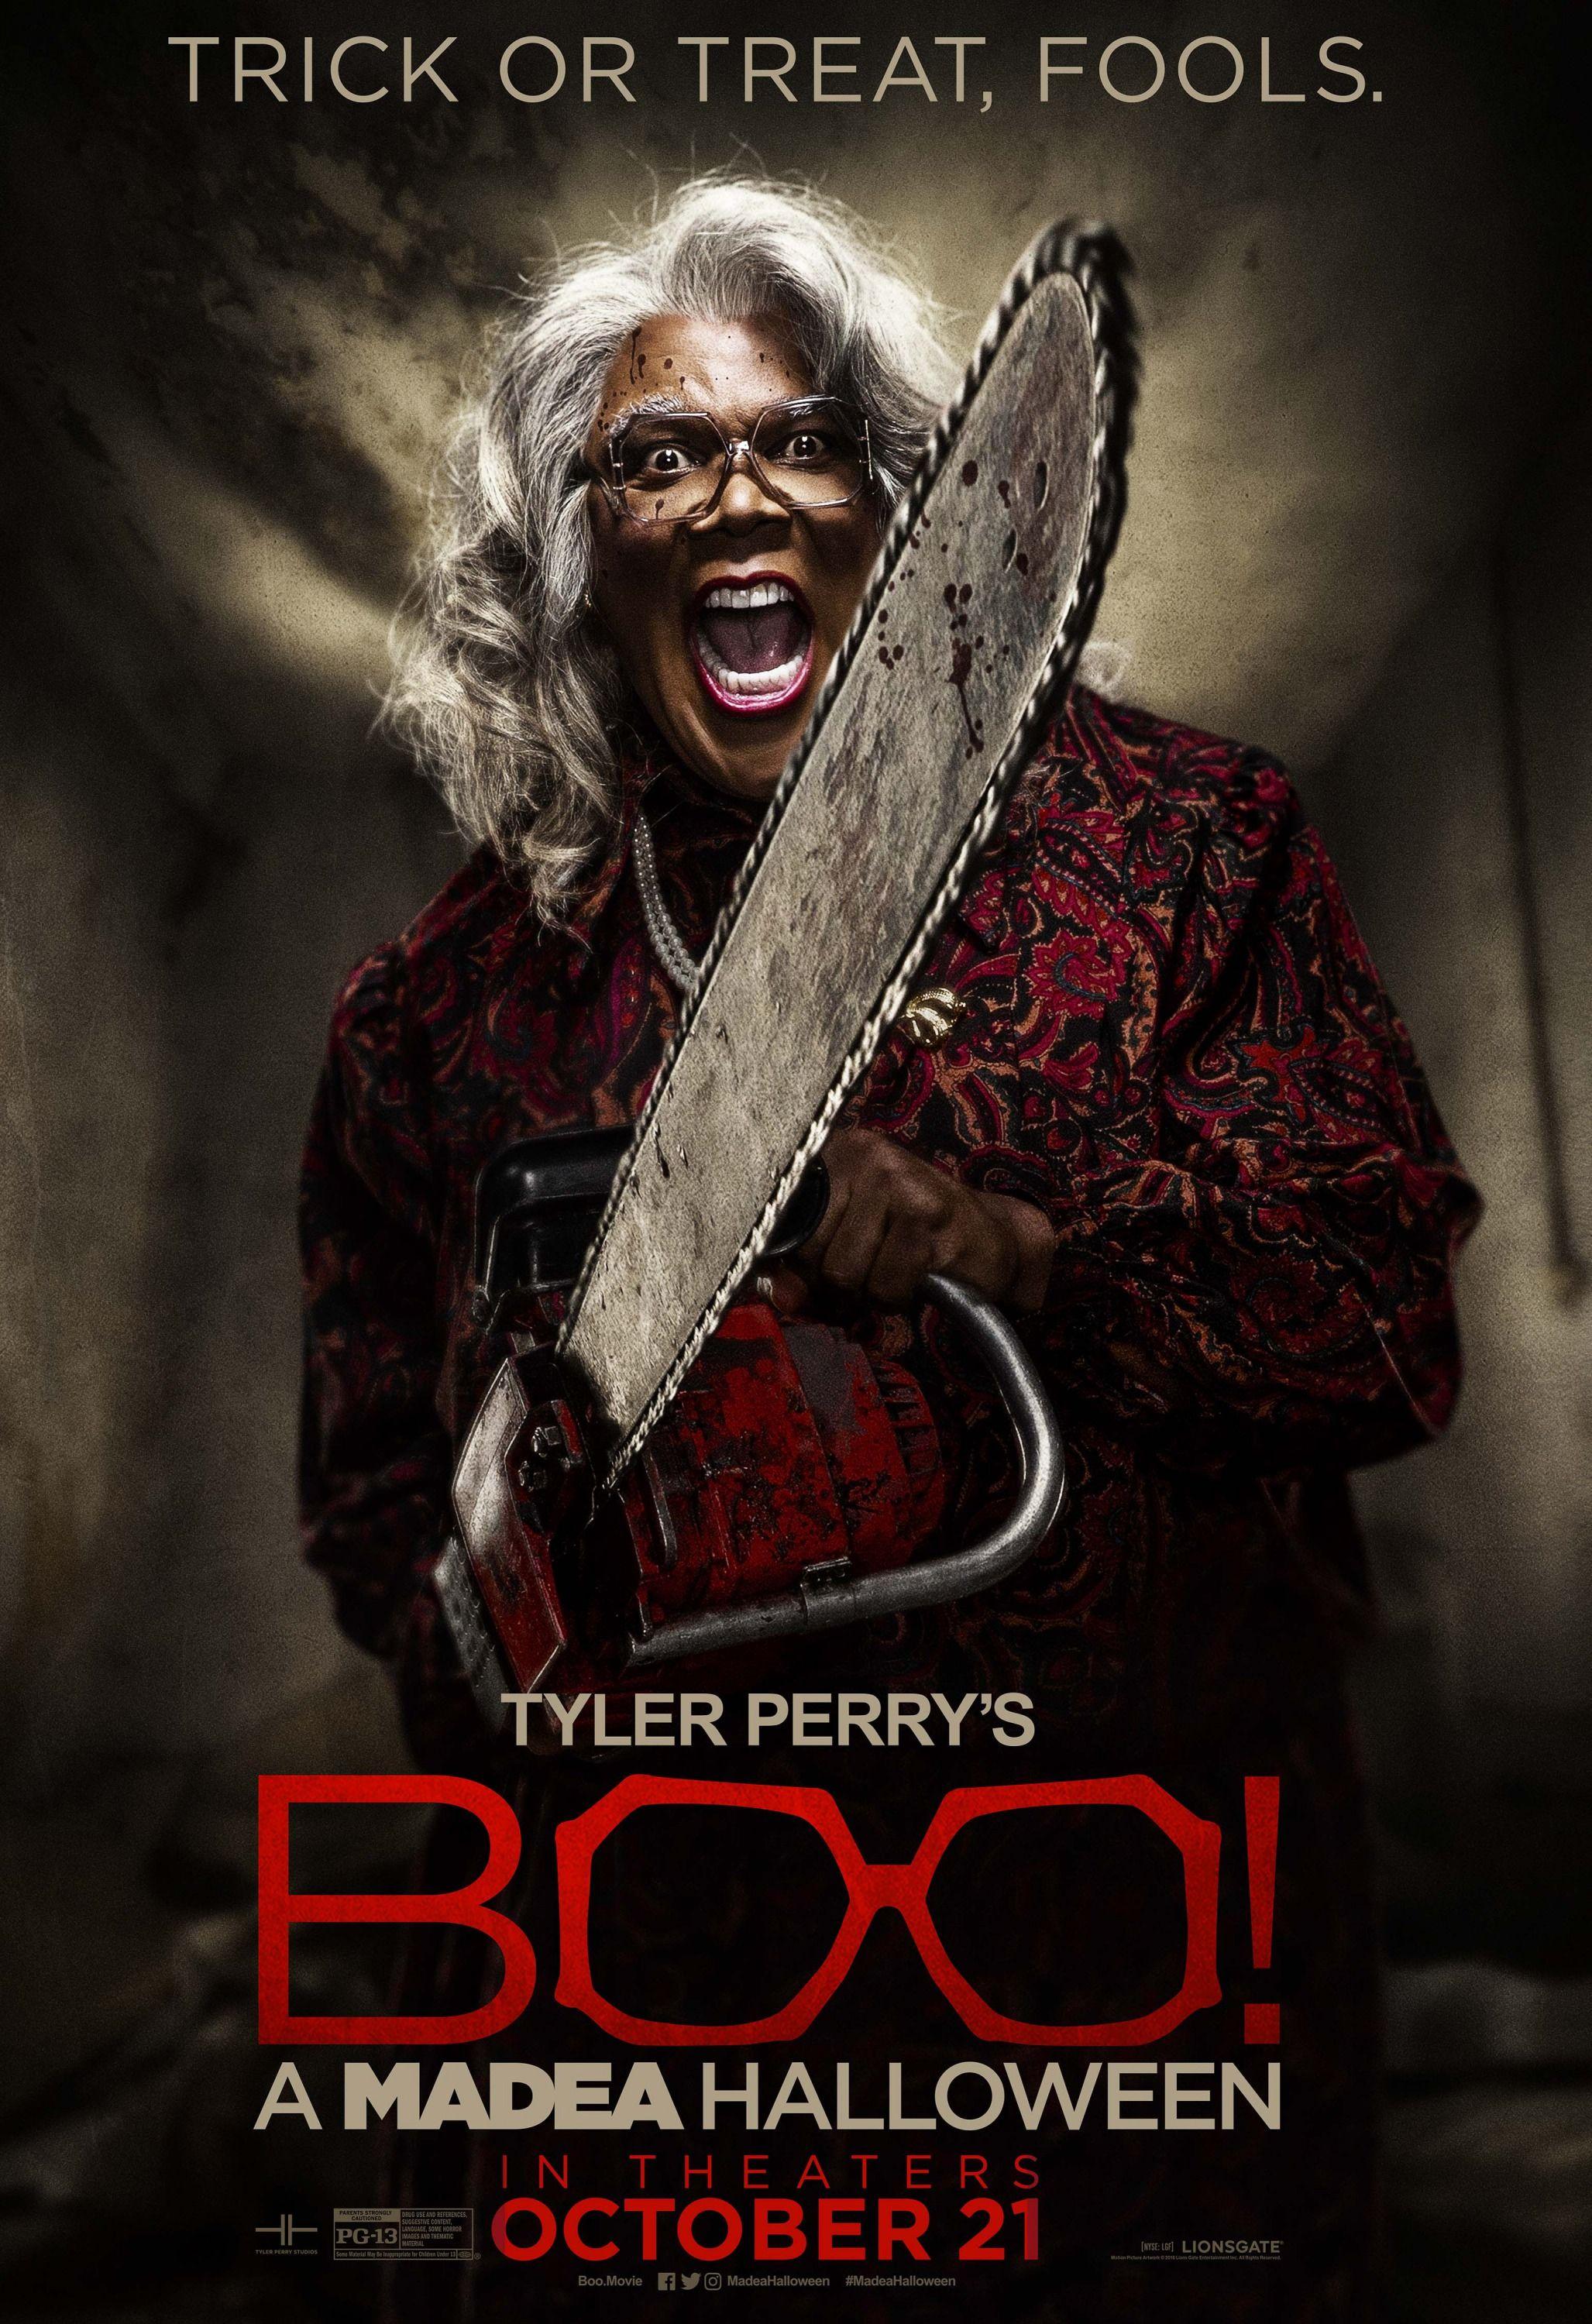 More Posters To Tyler Perry's Boo! A Madea Halloween